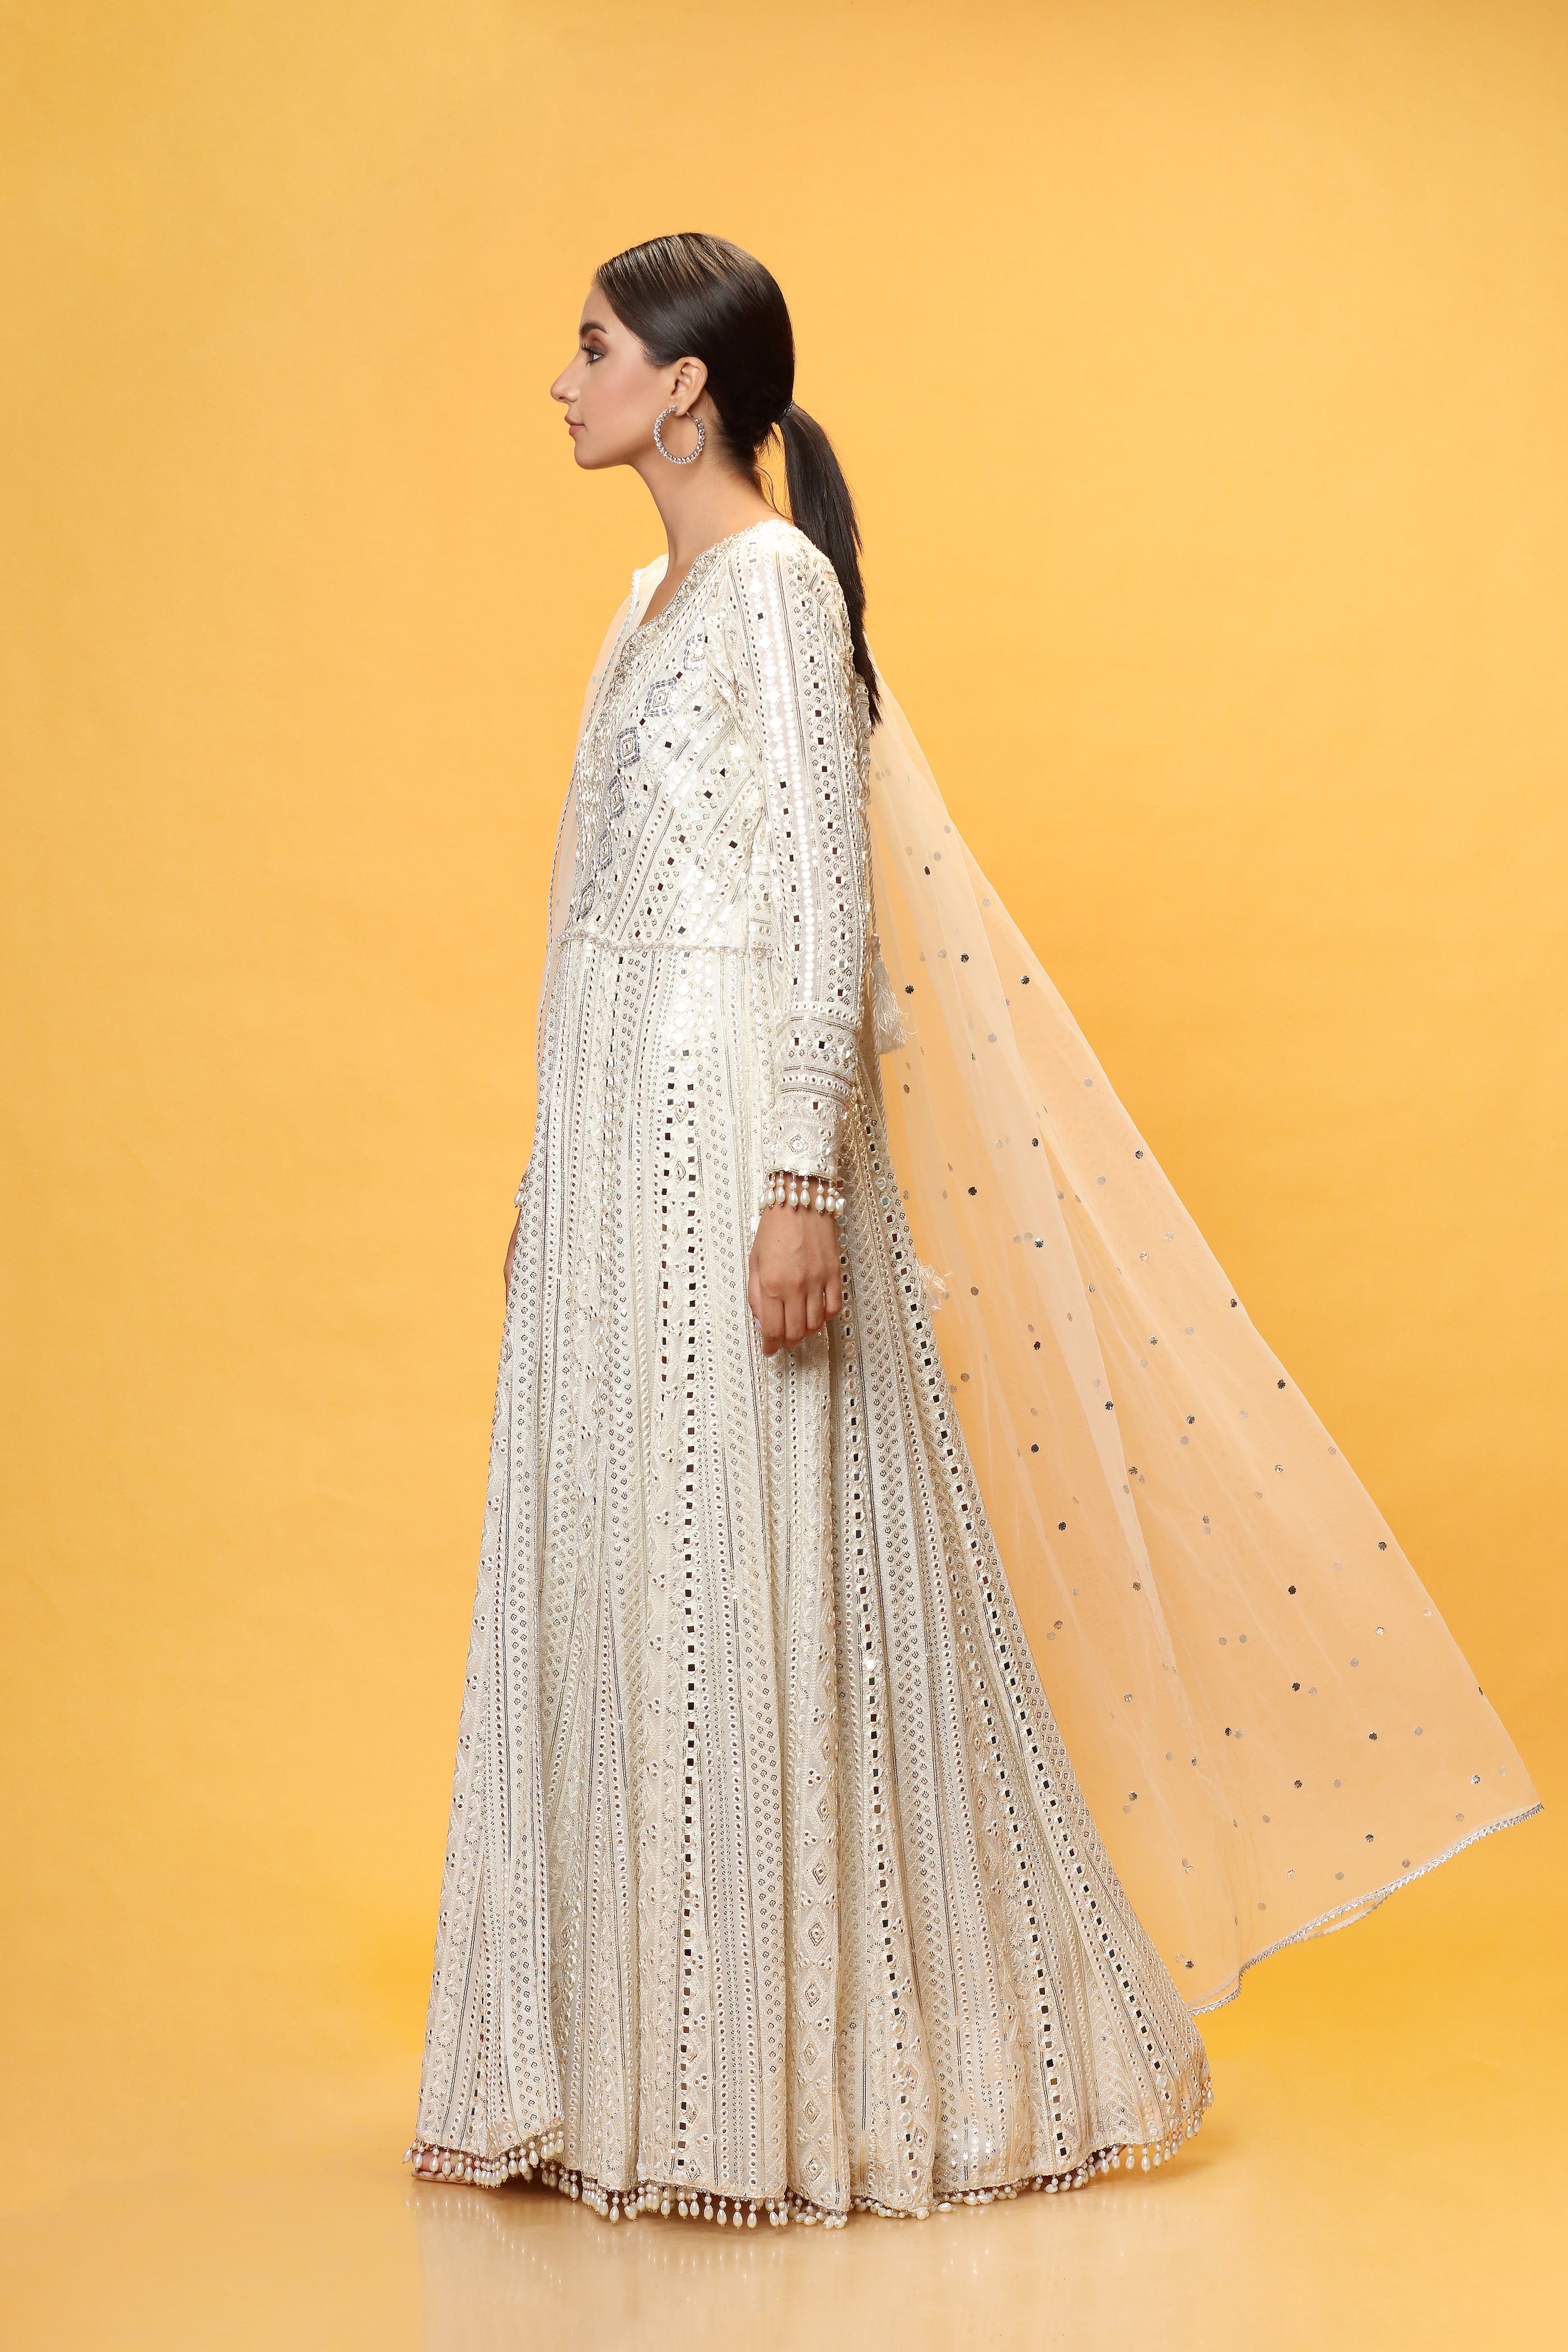 A stunning Dress made in chikanKari with Panni lines. Loaded with mirrors stitched in fabric and intricate stunning work on neckline in pearls.